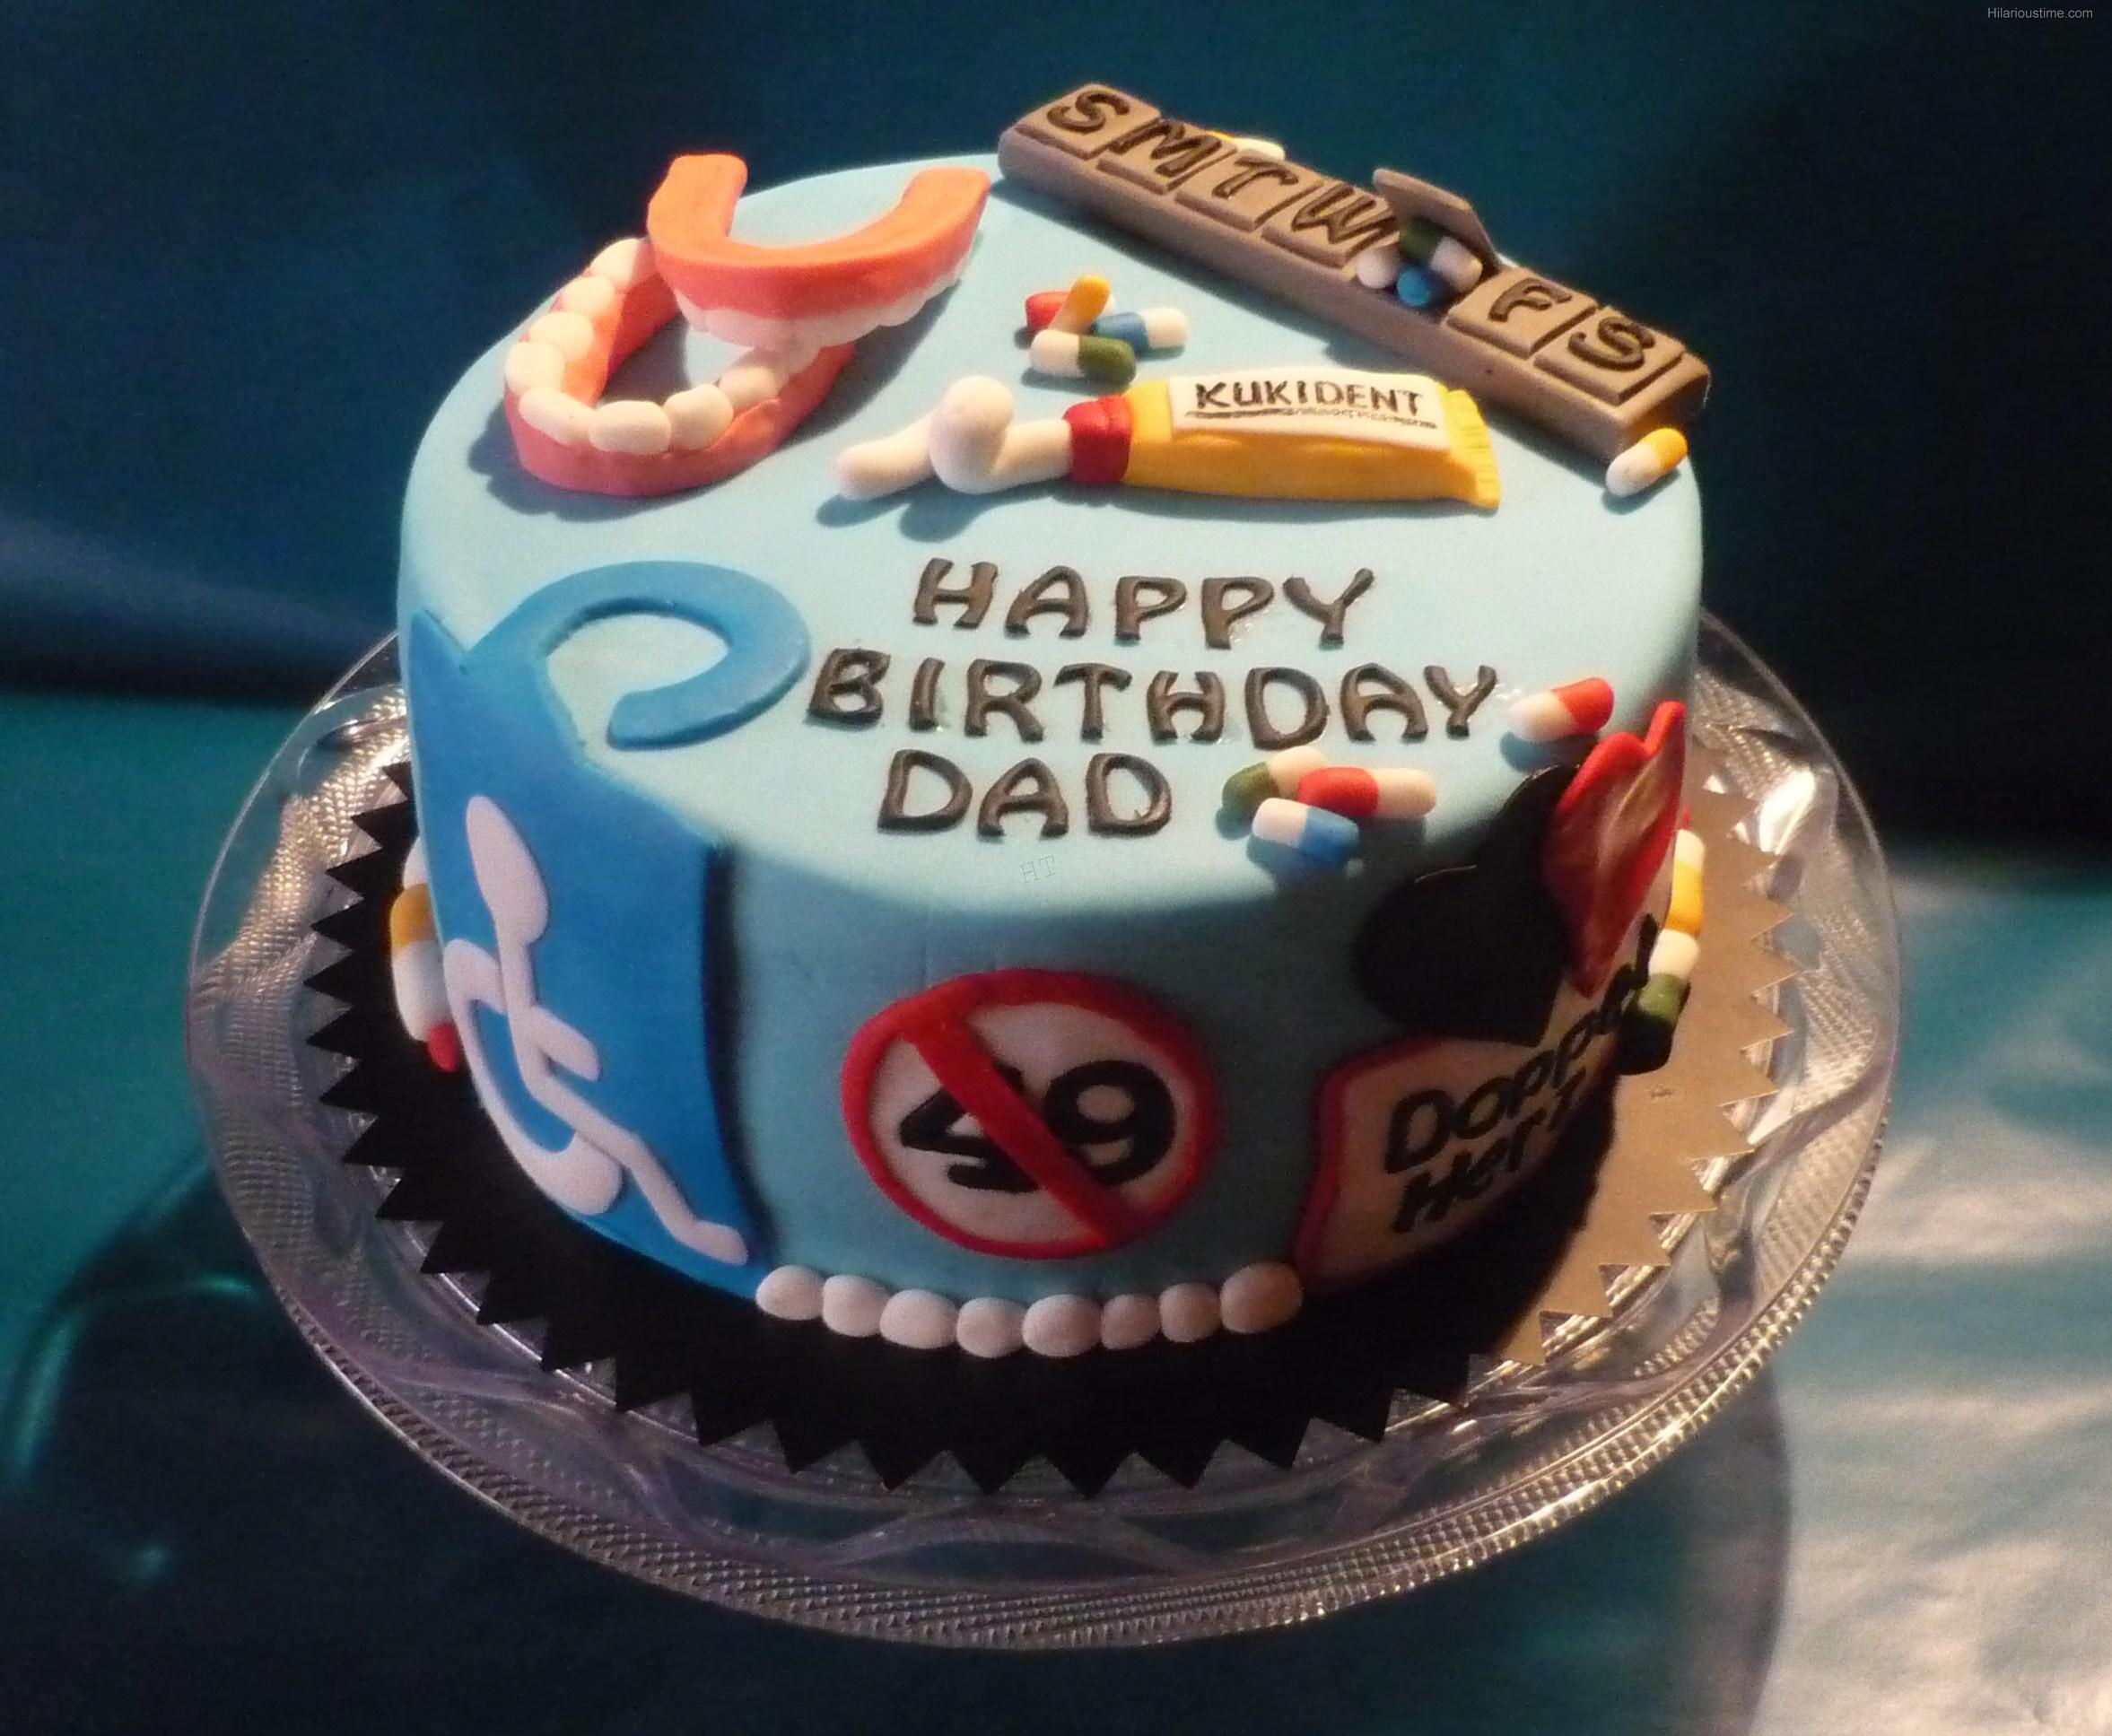 Awesome cakes